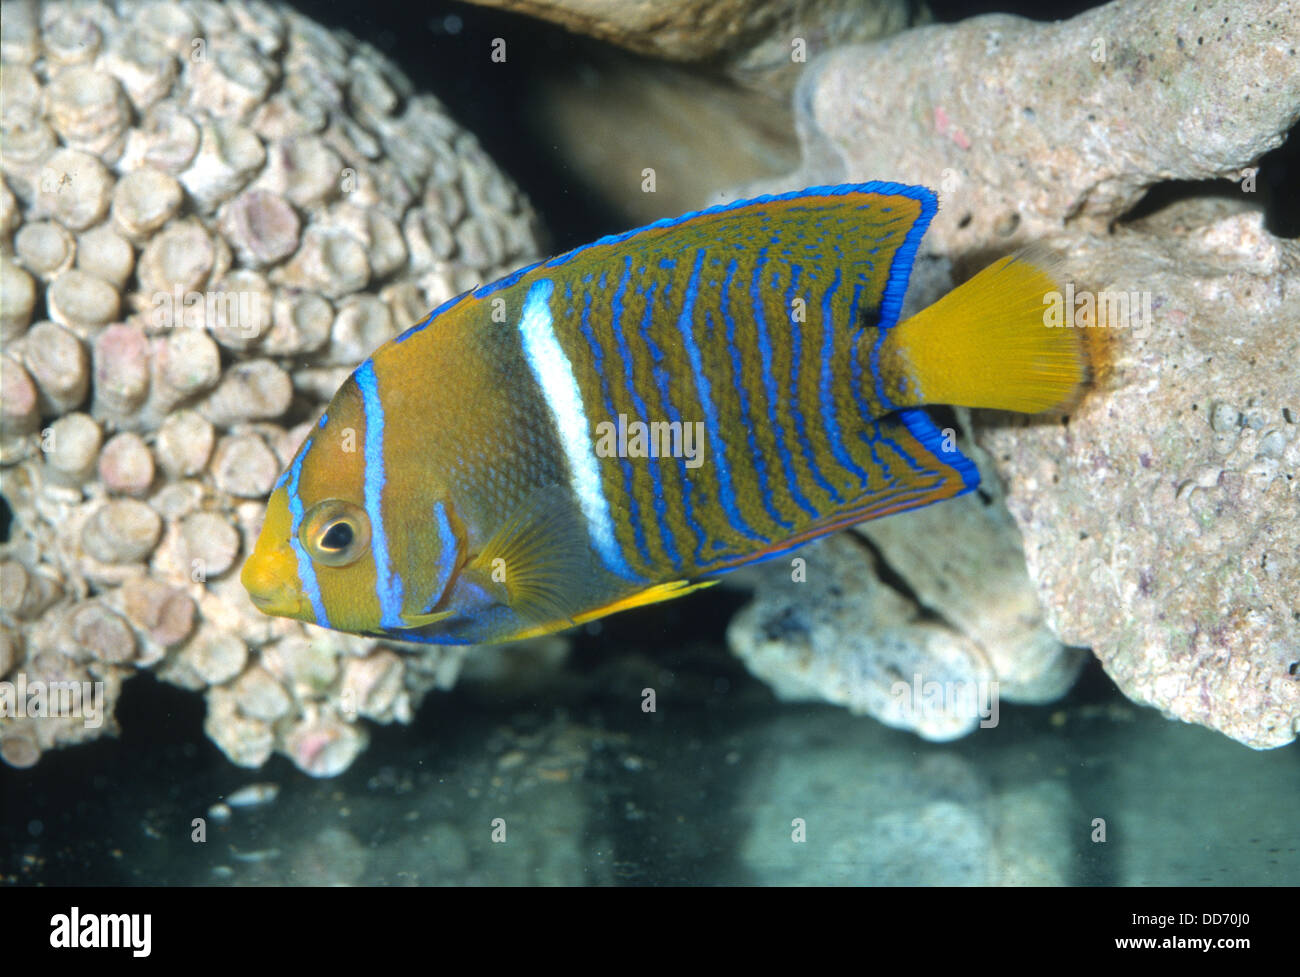 Young Passer Angelfish or King Angelfish, Holacanthus passer,  Pamacanthidae, Eastern Pacific Ocean Stock Photo